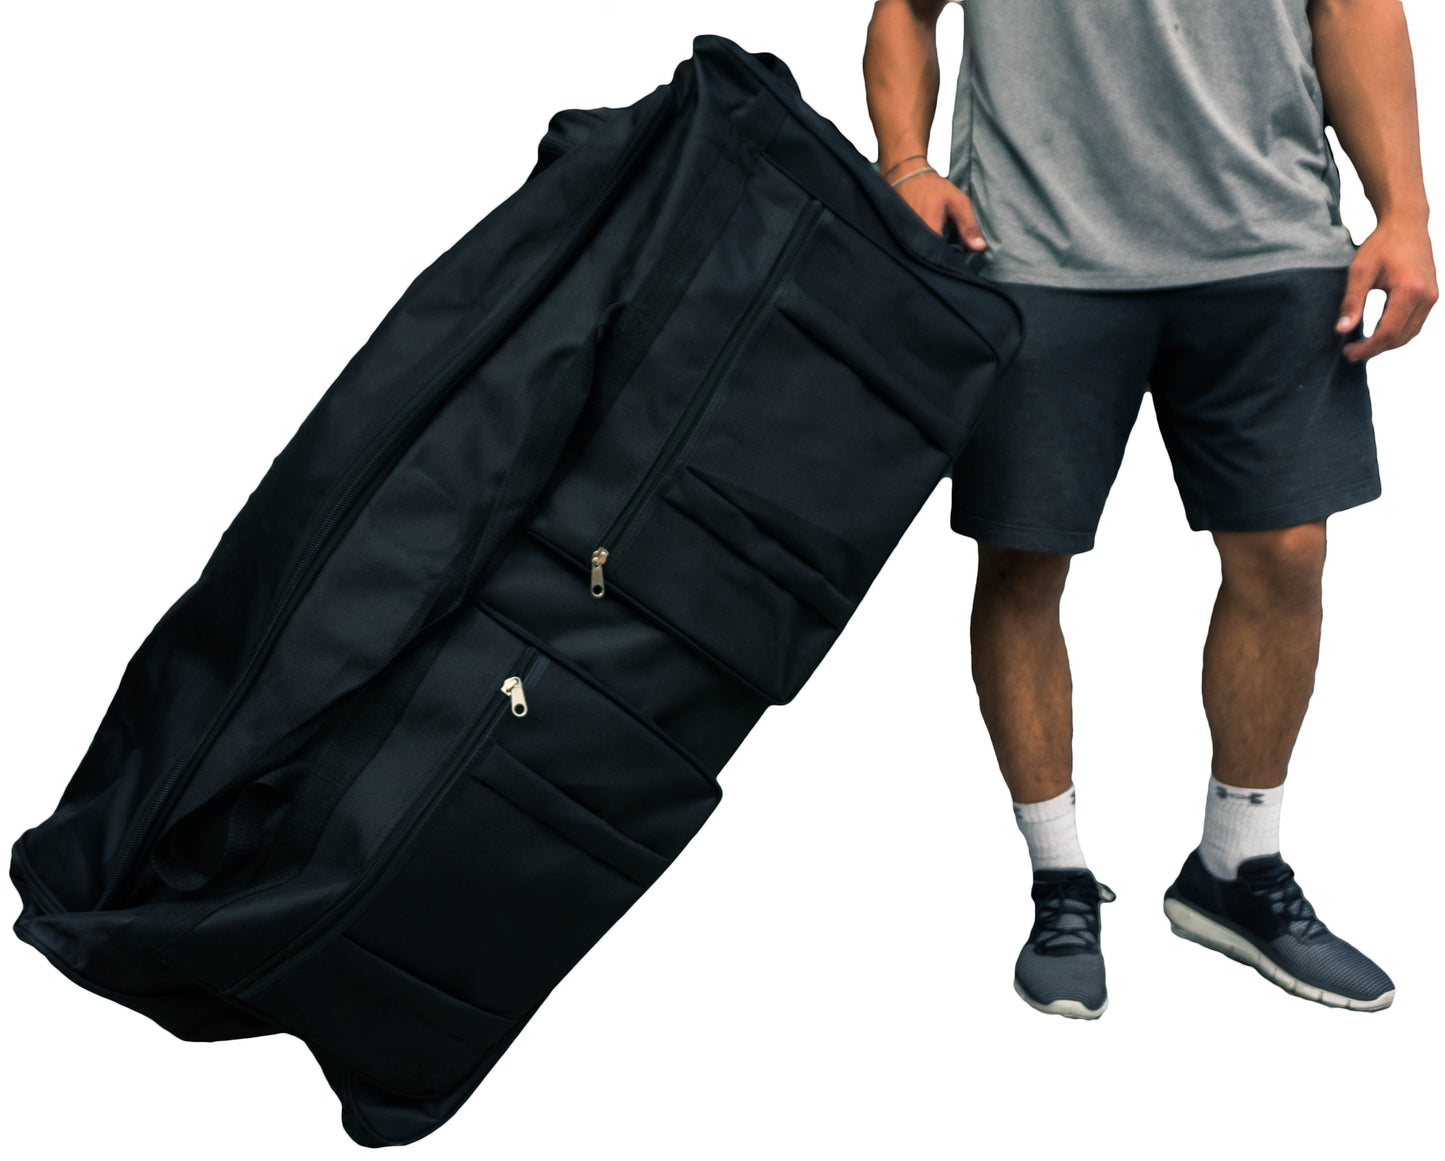 Glam'r Gear® Mobile Changing Station™ Dance Duffel Bag with Built-In uHide®  Rack | Glamr Gear